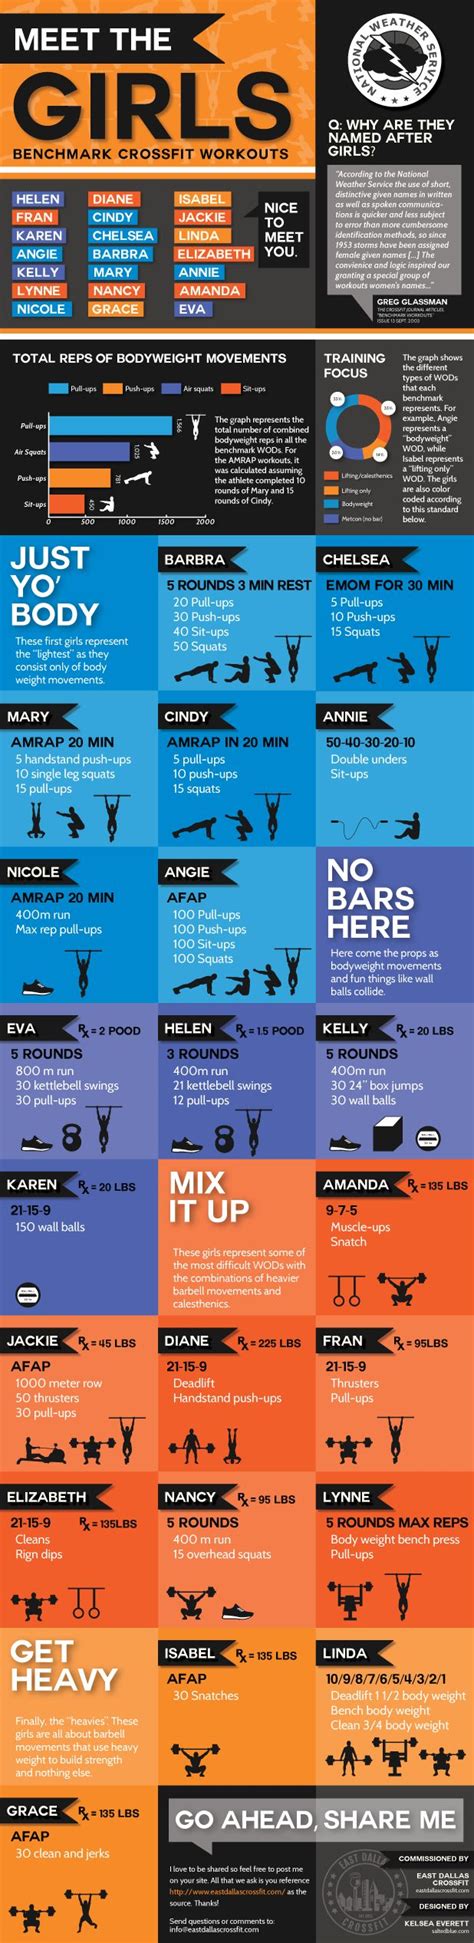 Meet The Girls Benchmark Crossfit Workouts The Wod Life